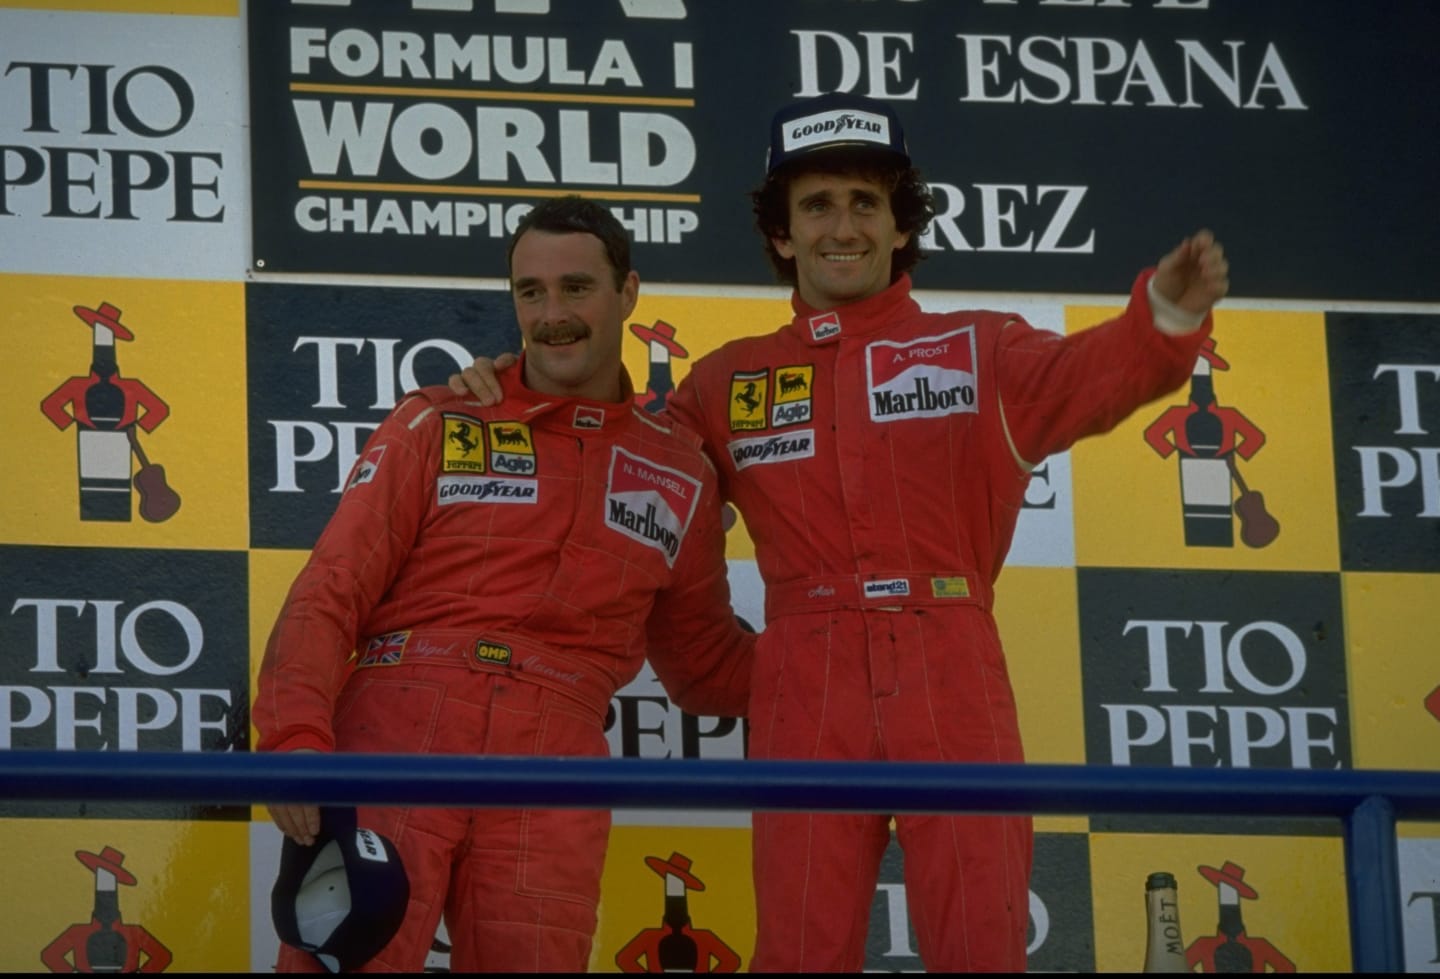 1990:  Scuderia Ferrari drivers Nigel Mansell (left) of Great Britain and Alain Prost (right) of